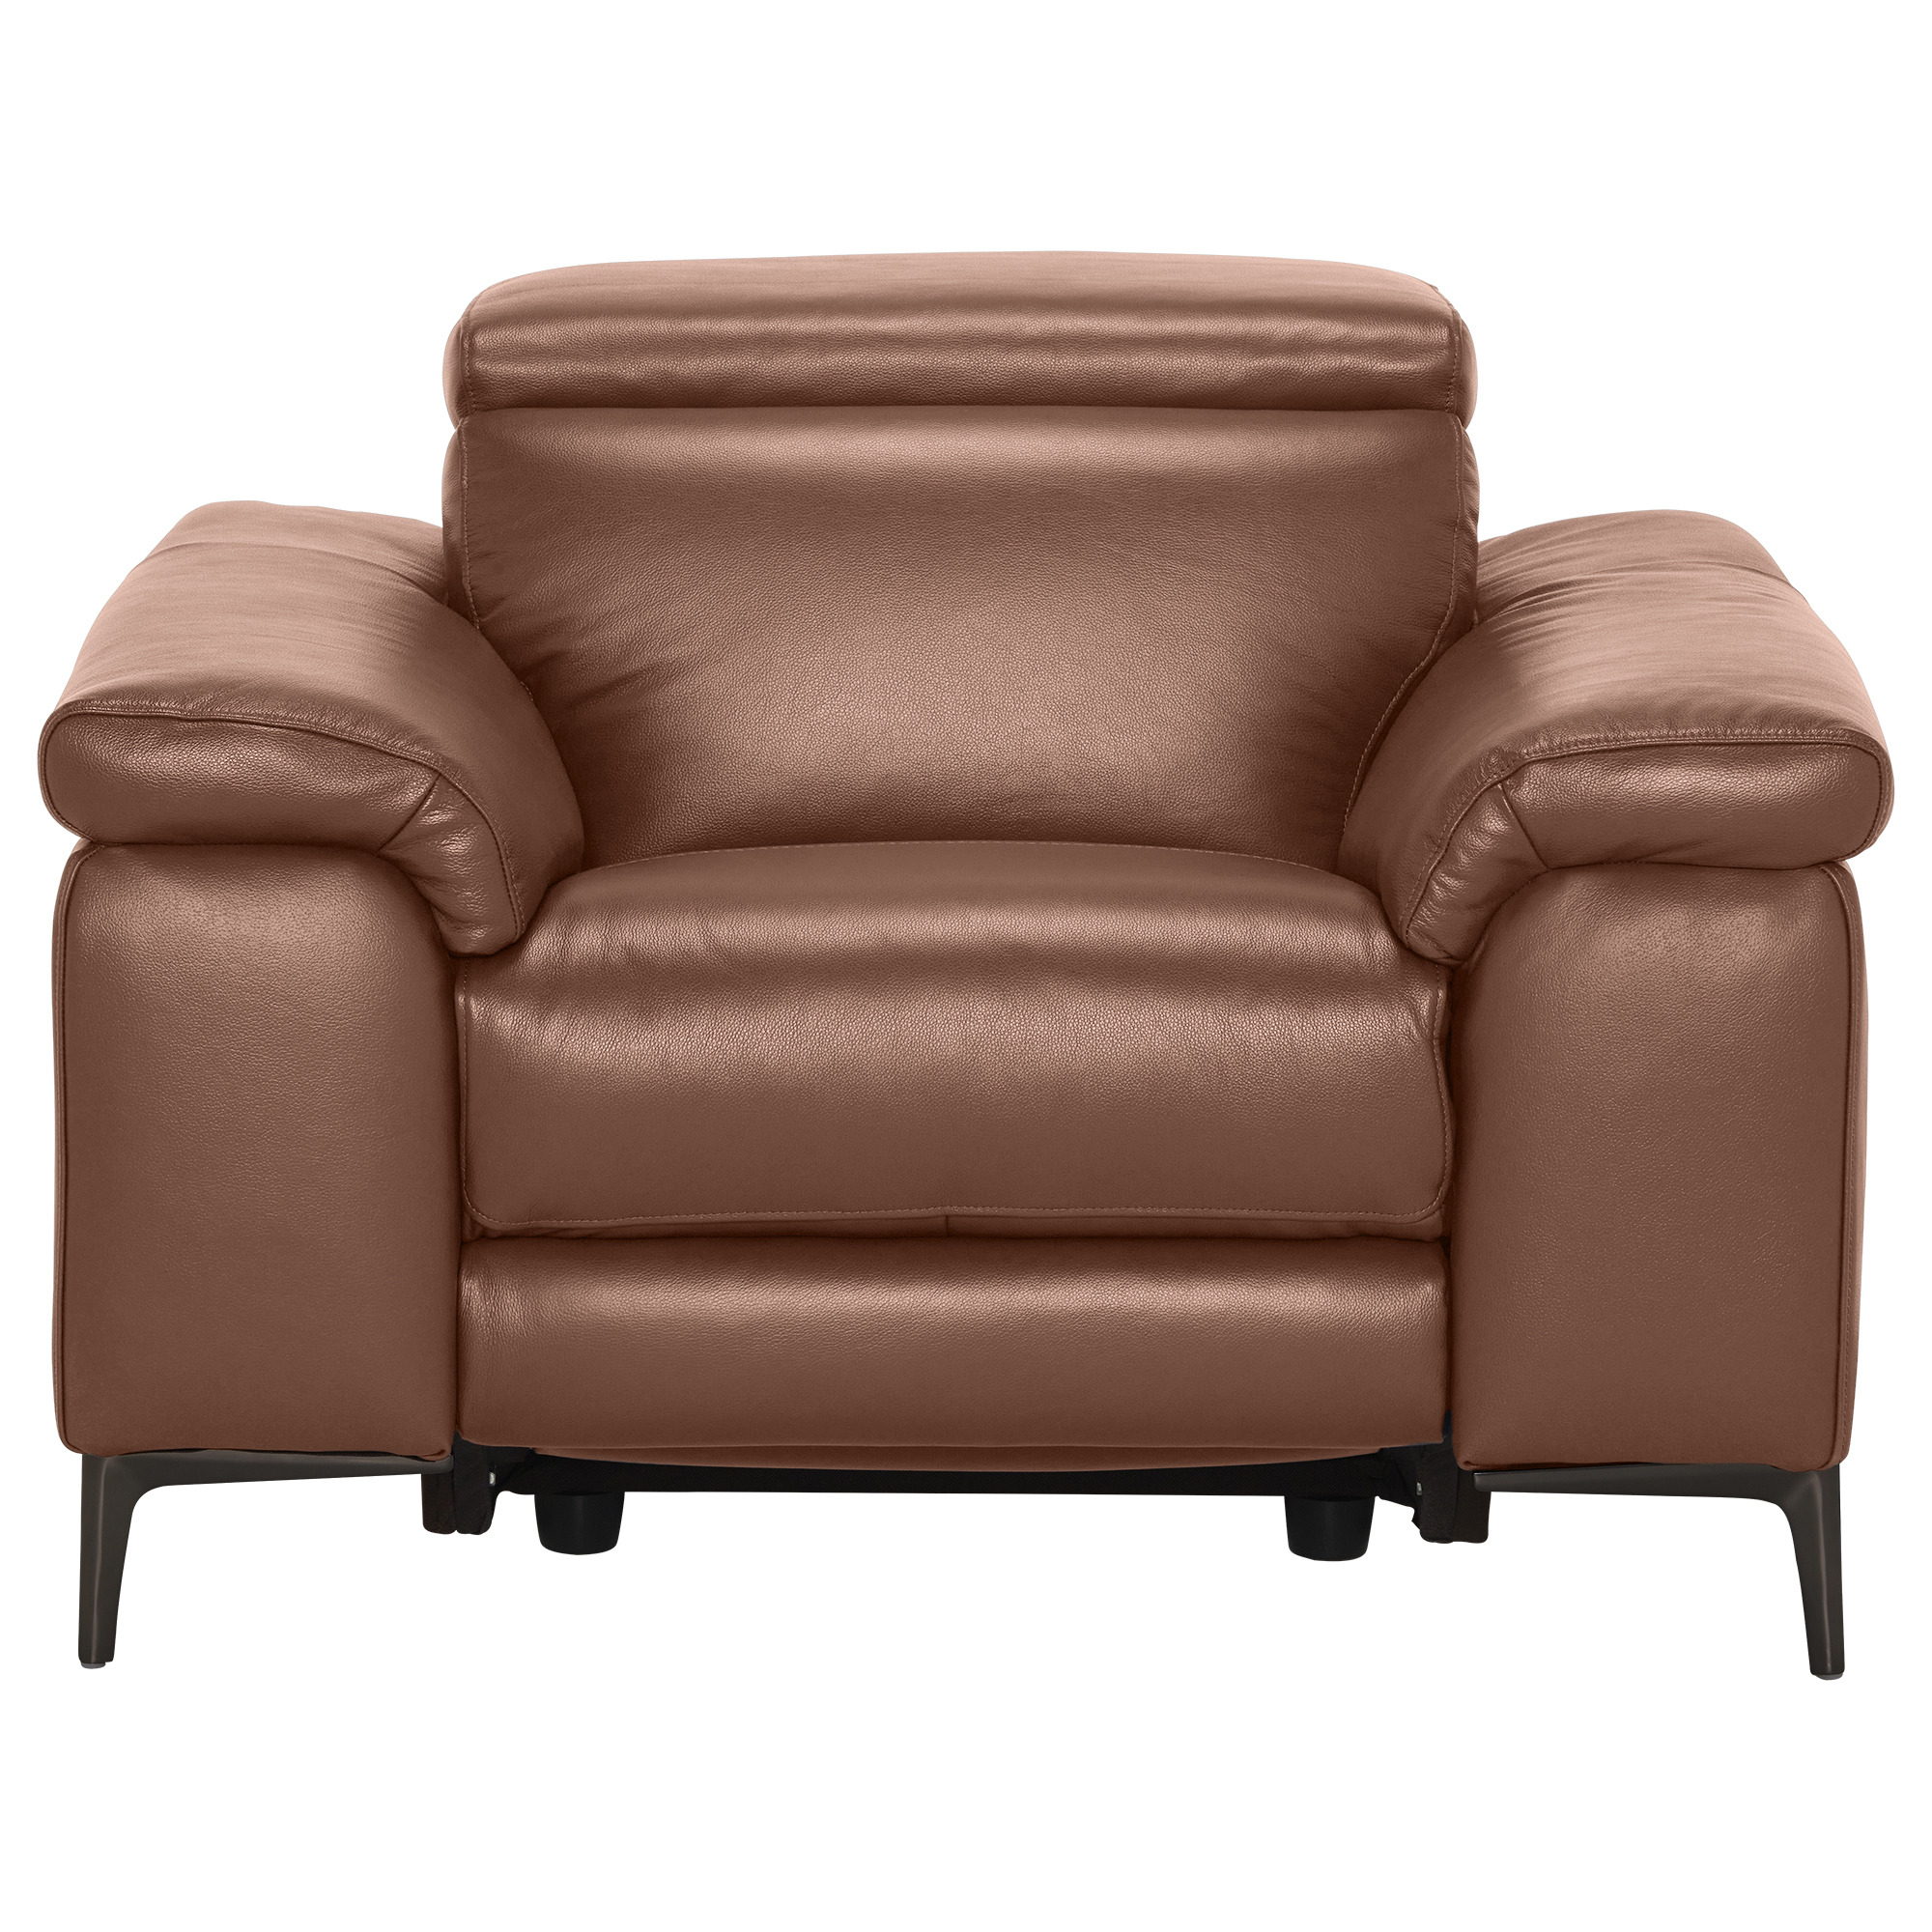 Paolo Electric Recliner Chair With Headrest - Barker & Stonehouse - image 1